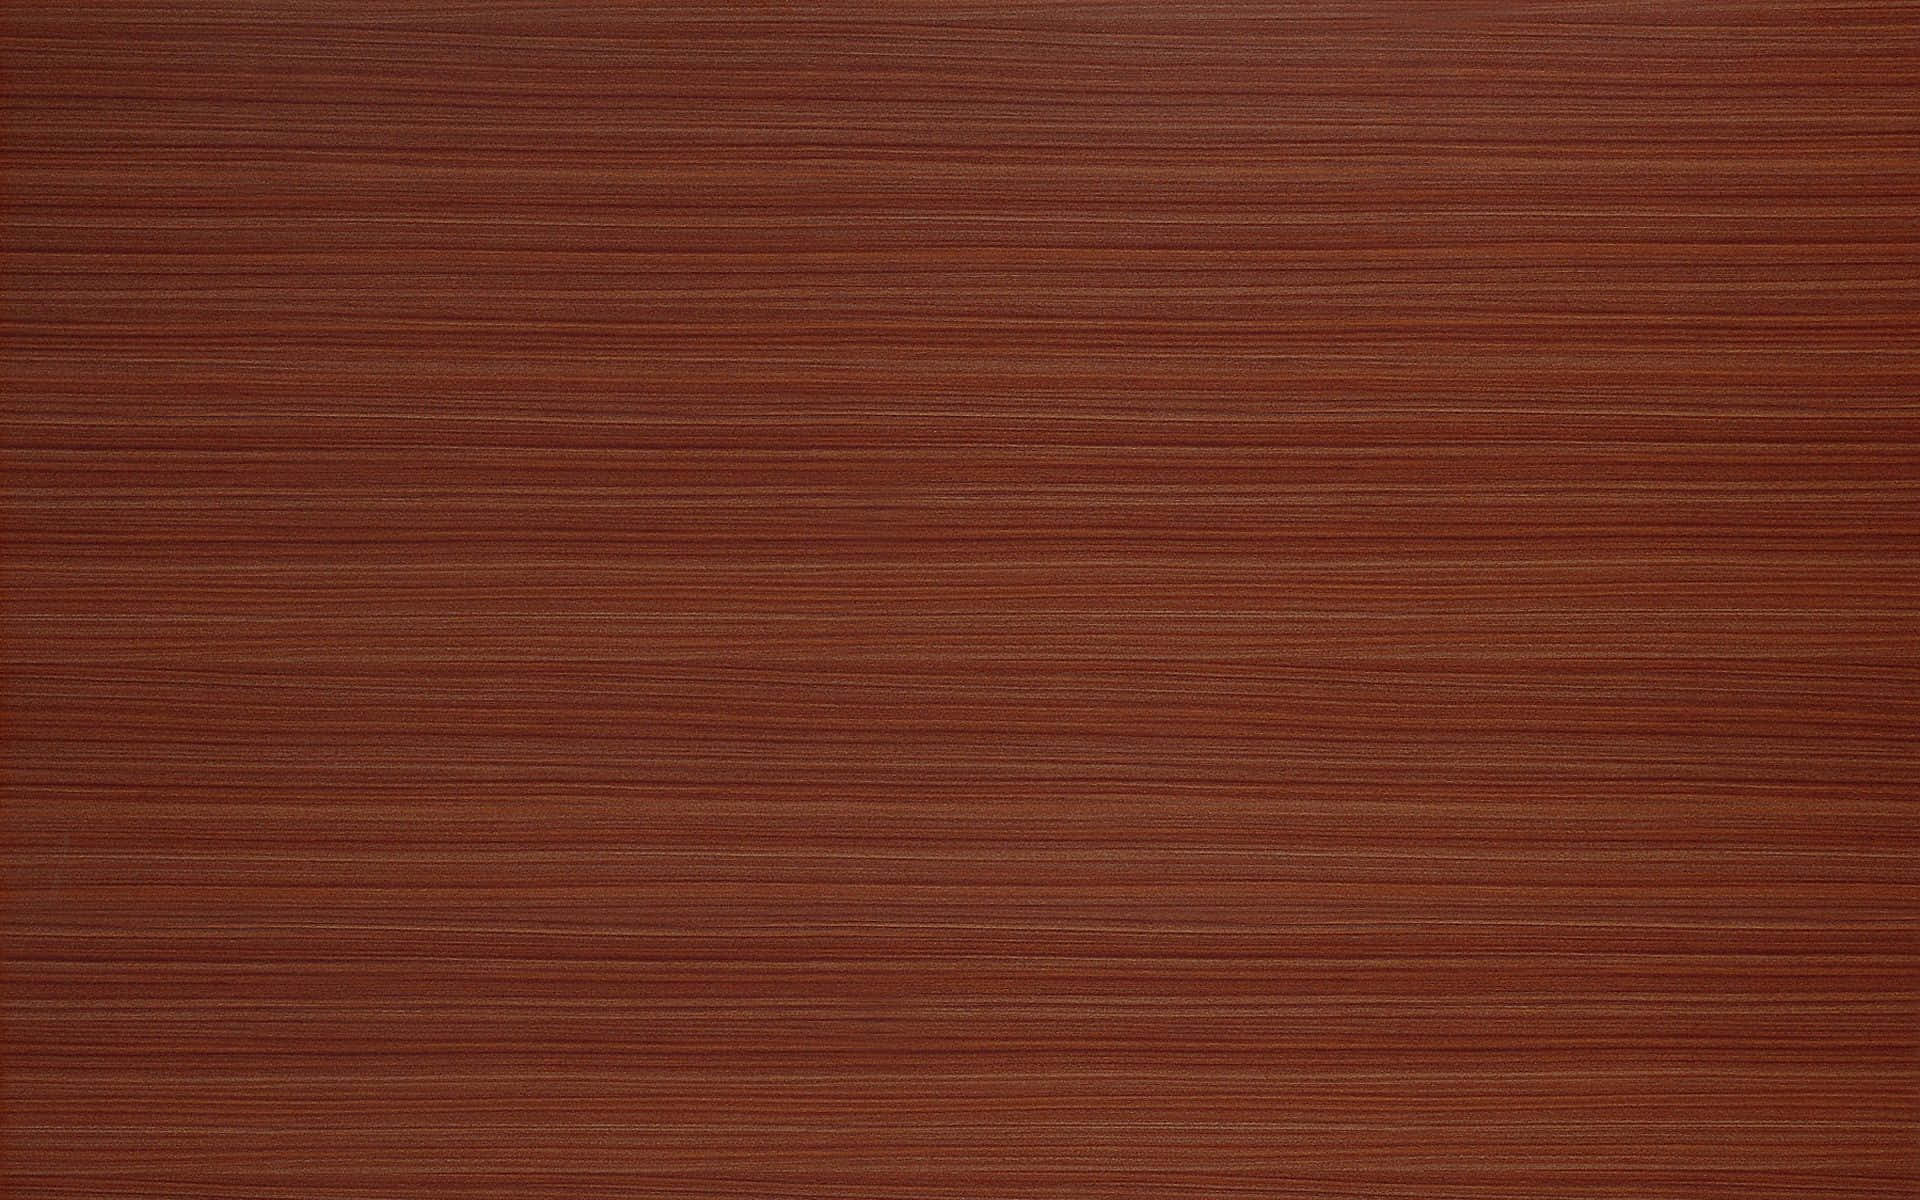 Luxurious Mahogany Wood Texture Background Wallpaper